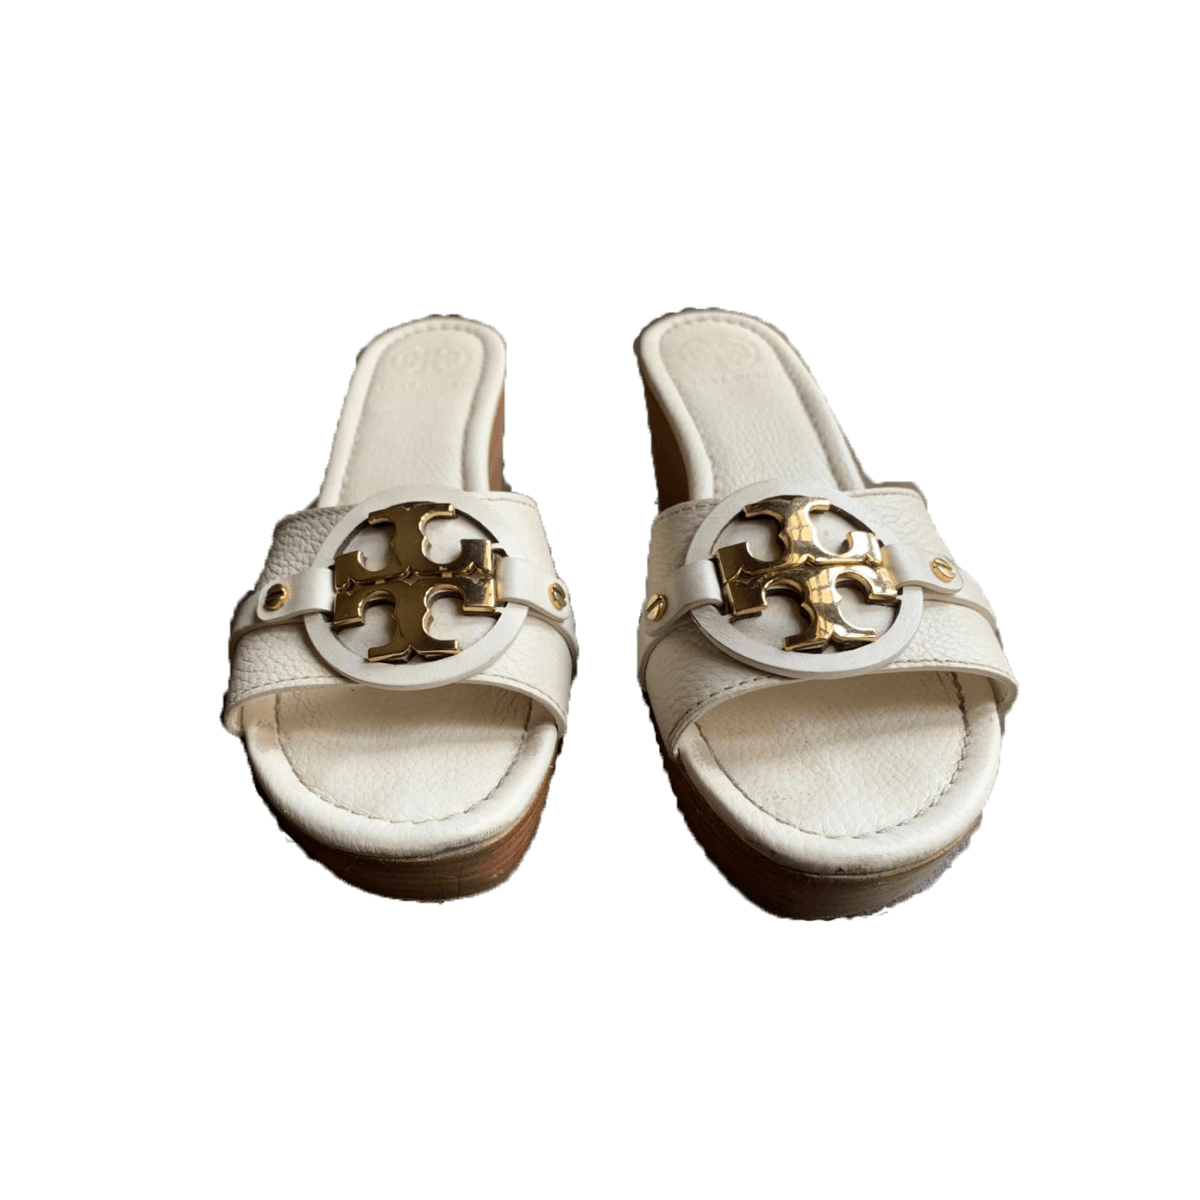 Tory Burch White Leather Selma Wedge Slides Size - 38